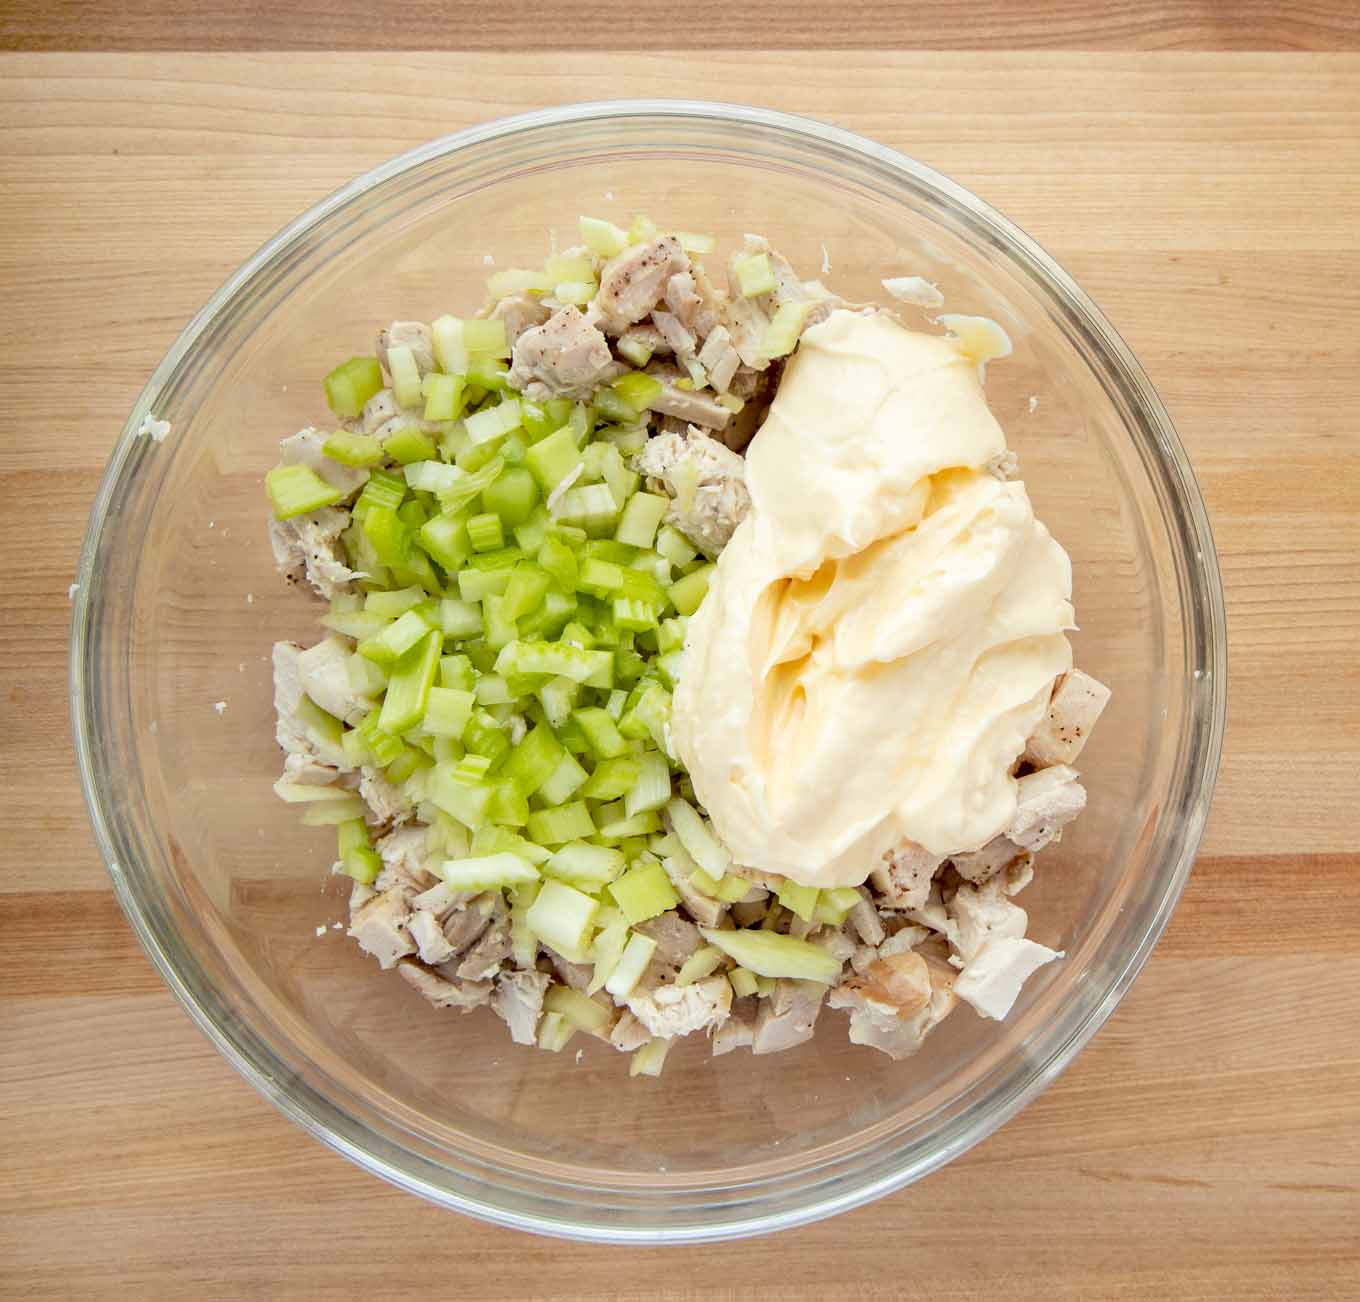 chopped chicken, diced celery and mayonnaise in a glass bowl on a wooden cutting board